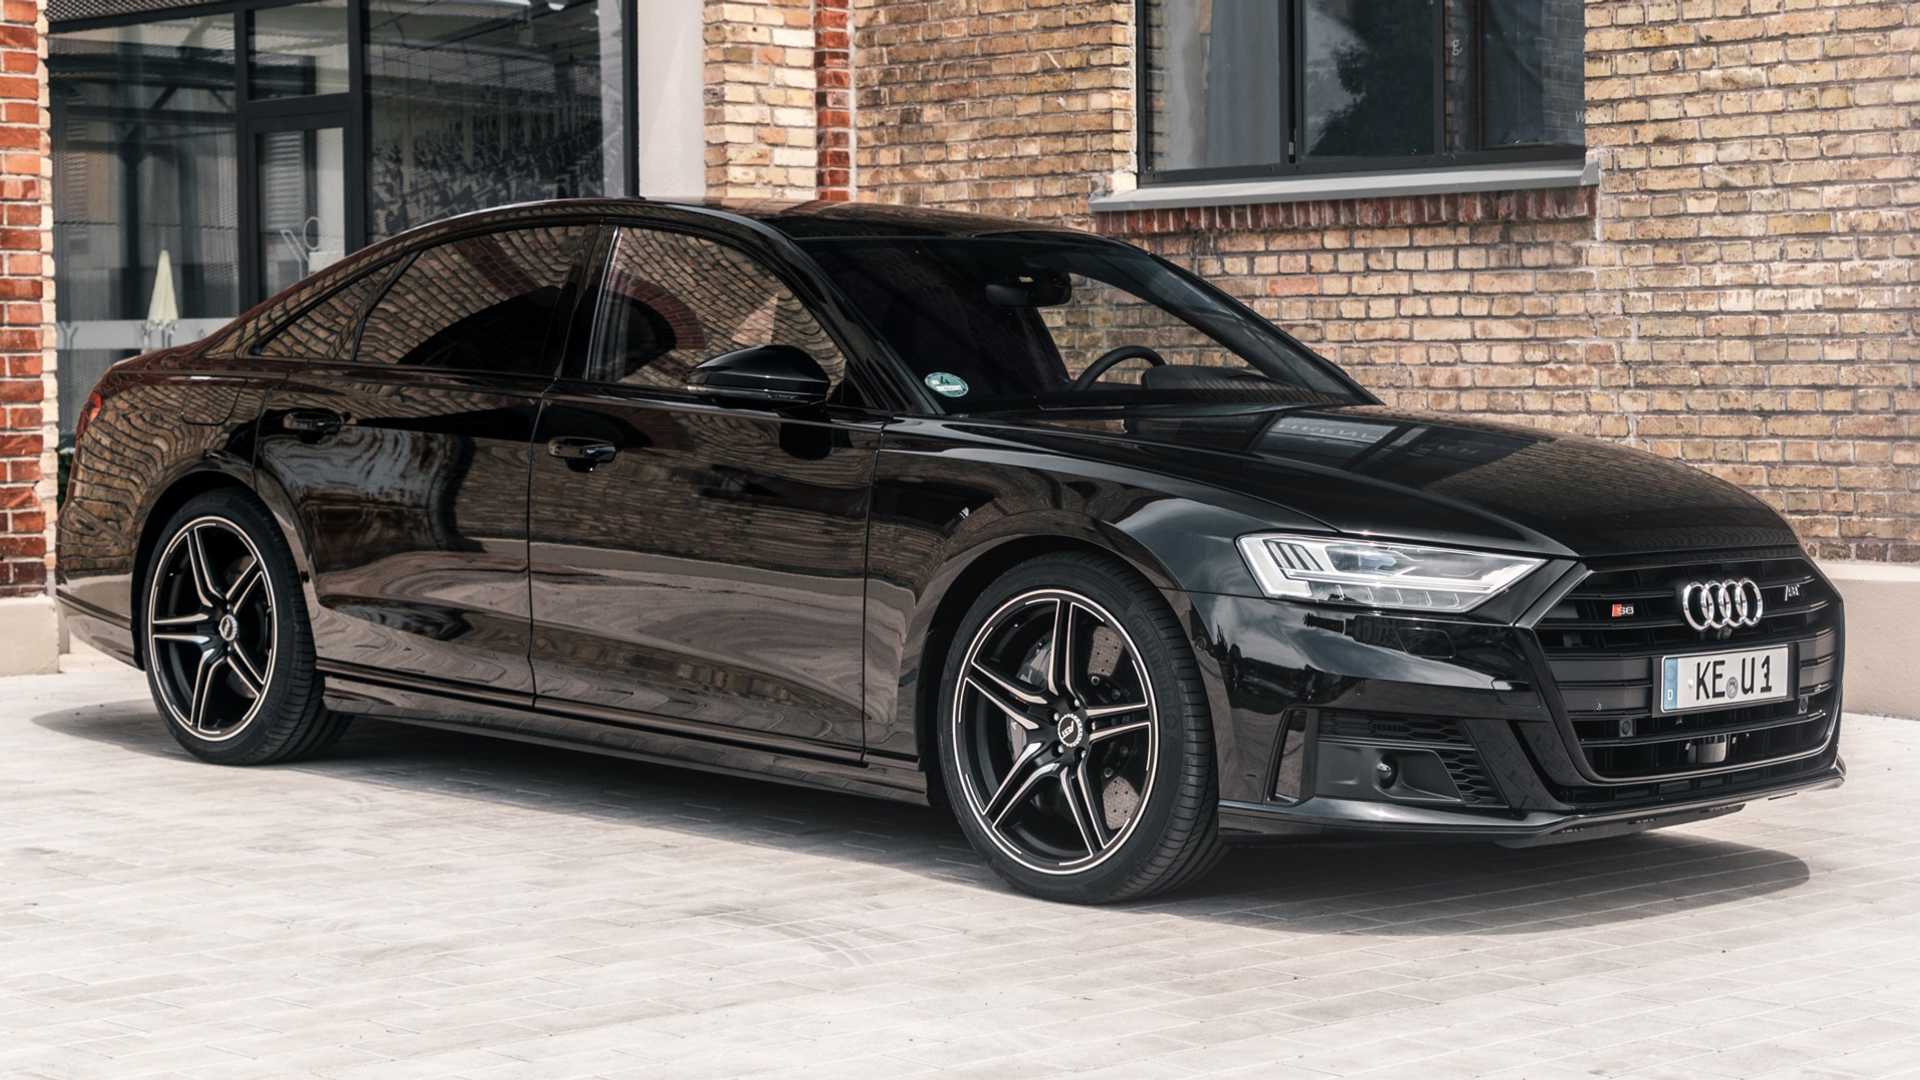 German Tuner Takes the Audi S8 To an Entirely New Level - autoevolution